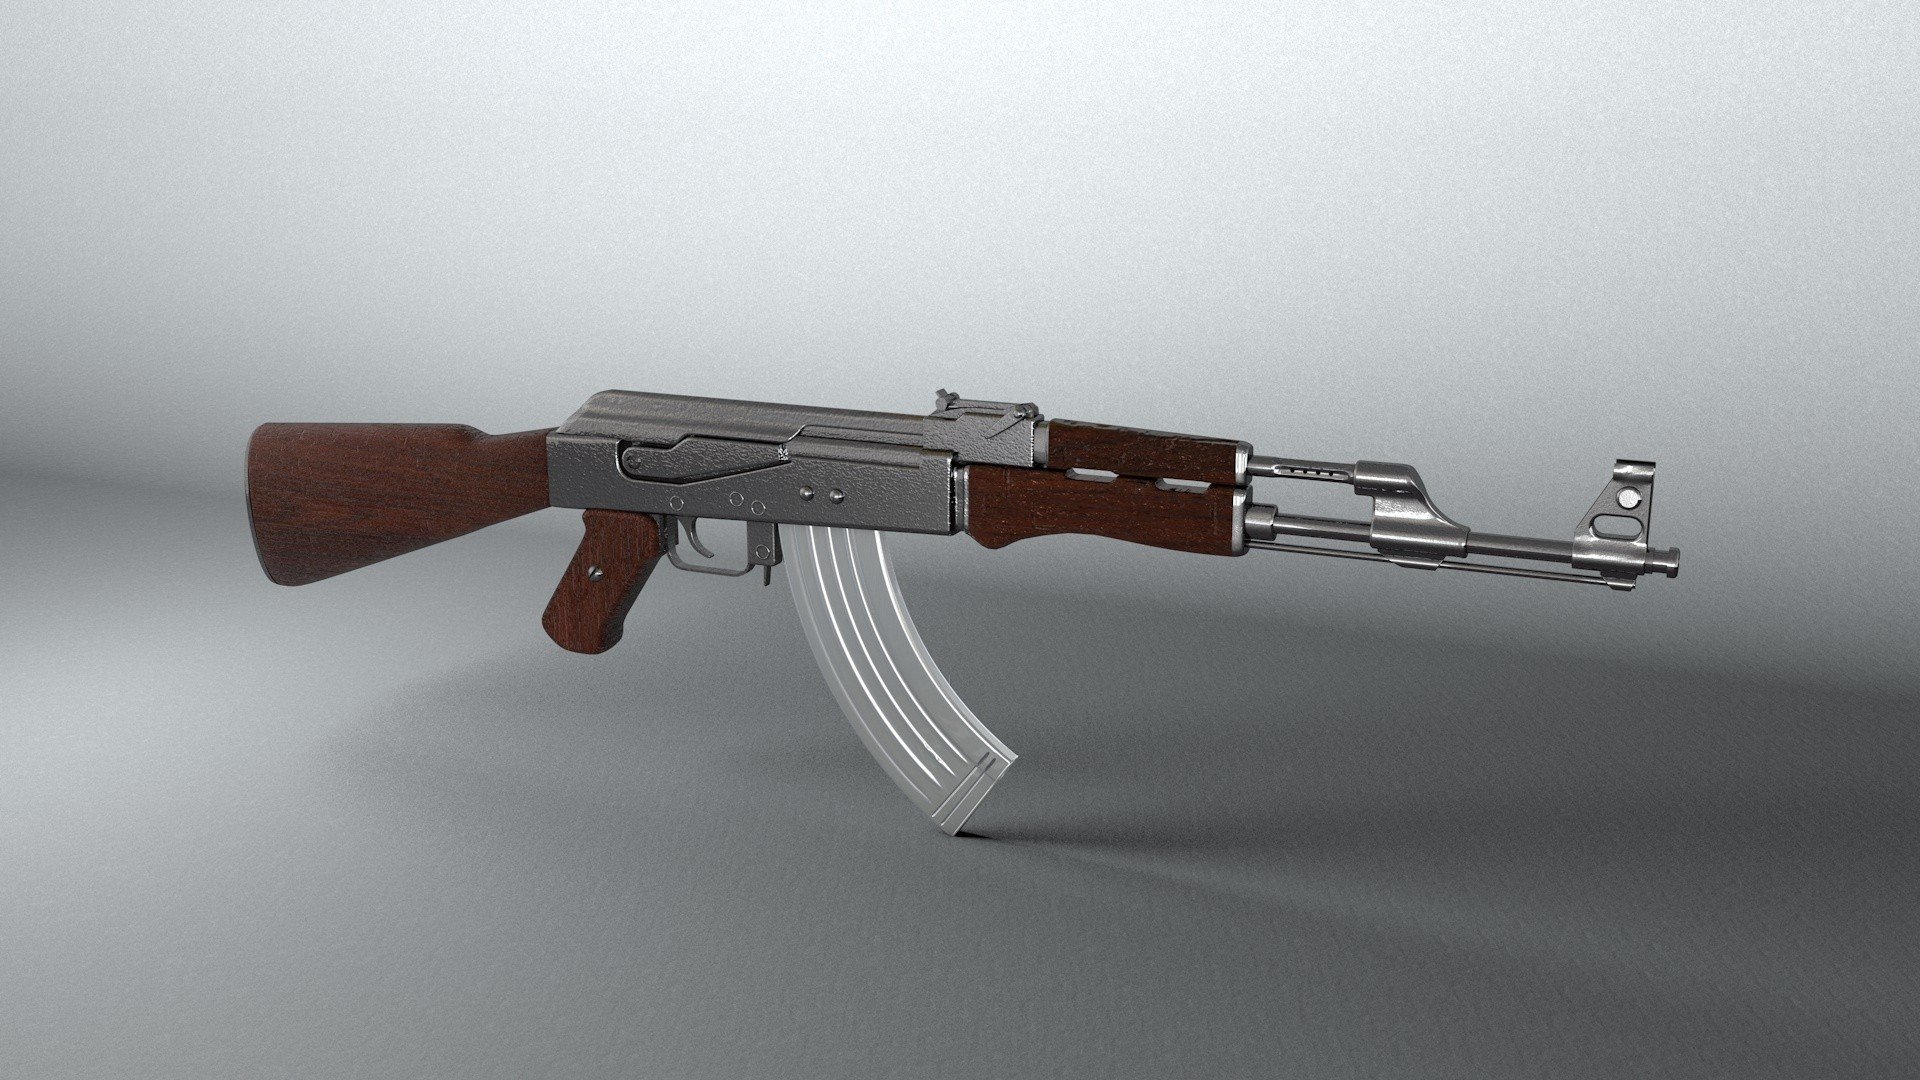 62 Ak 47 Hd Wallpapers Background Images Wallpaper Abyss